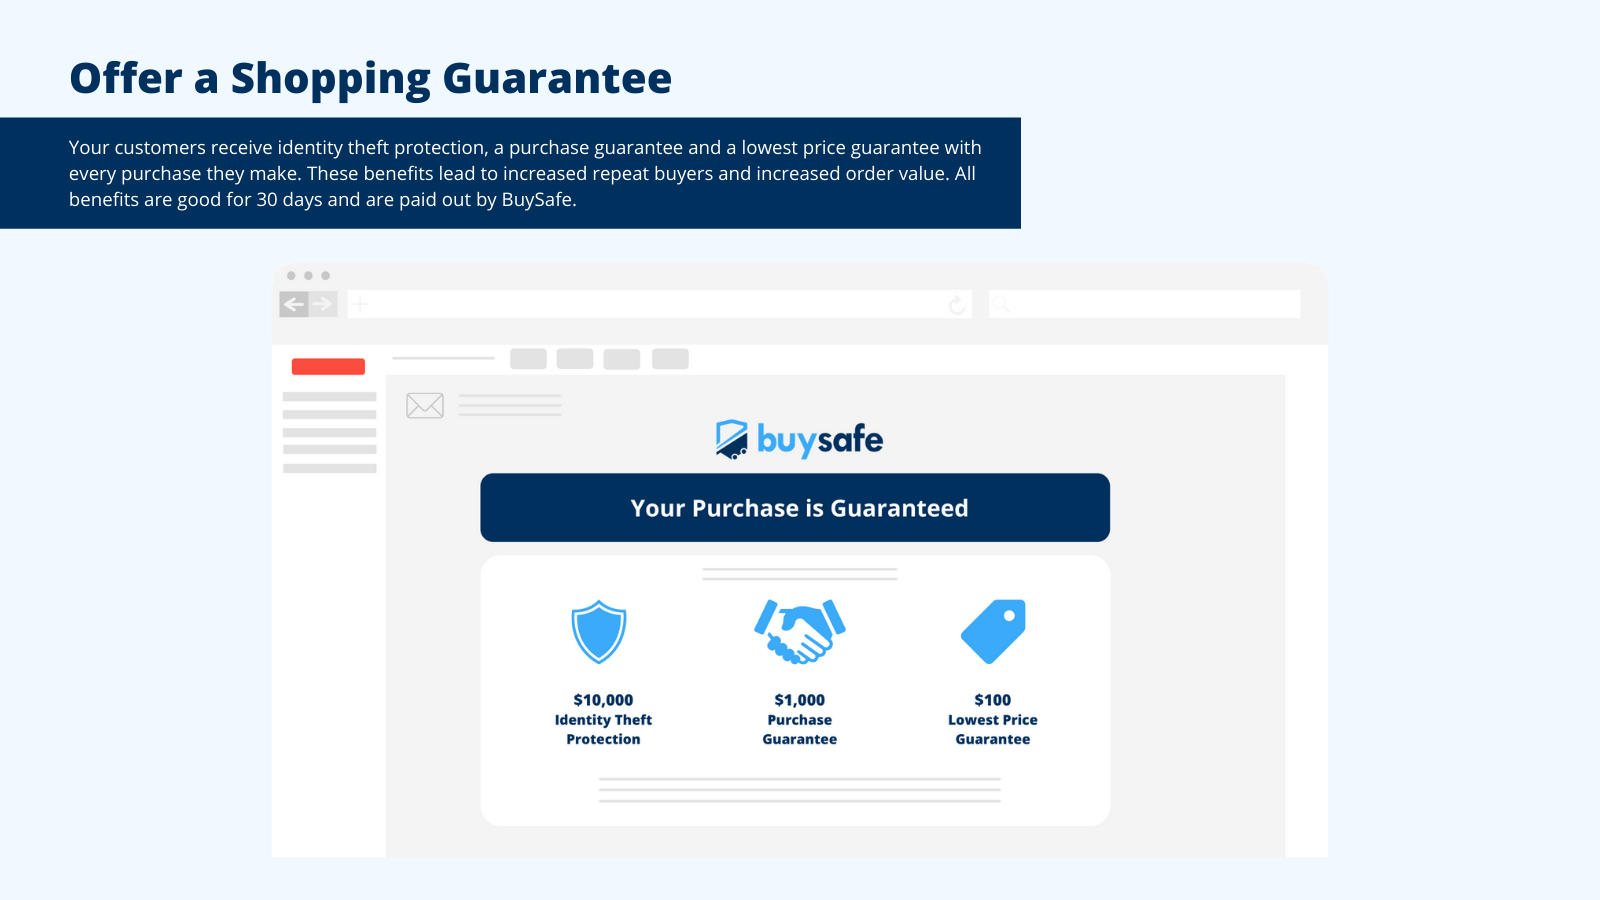 Offer a shopping guarantee to your customers